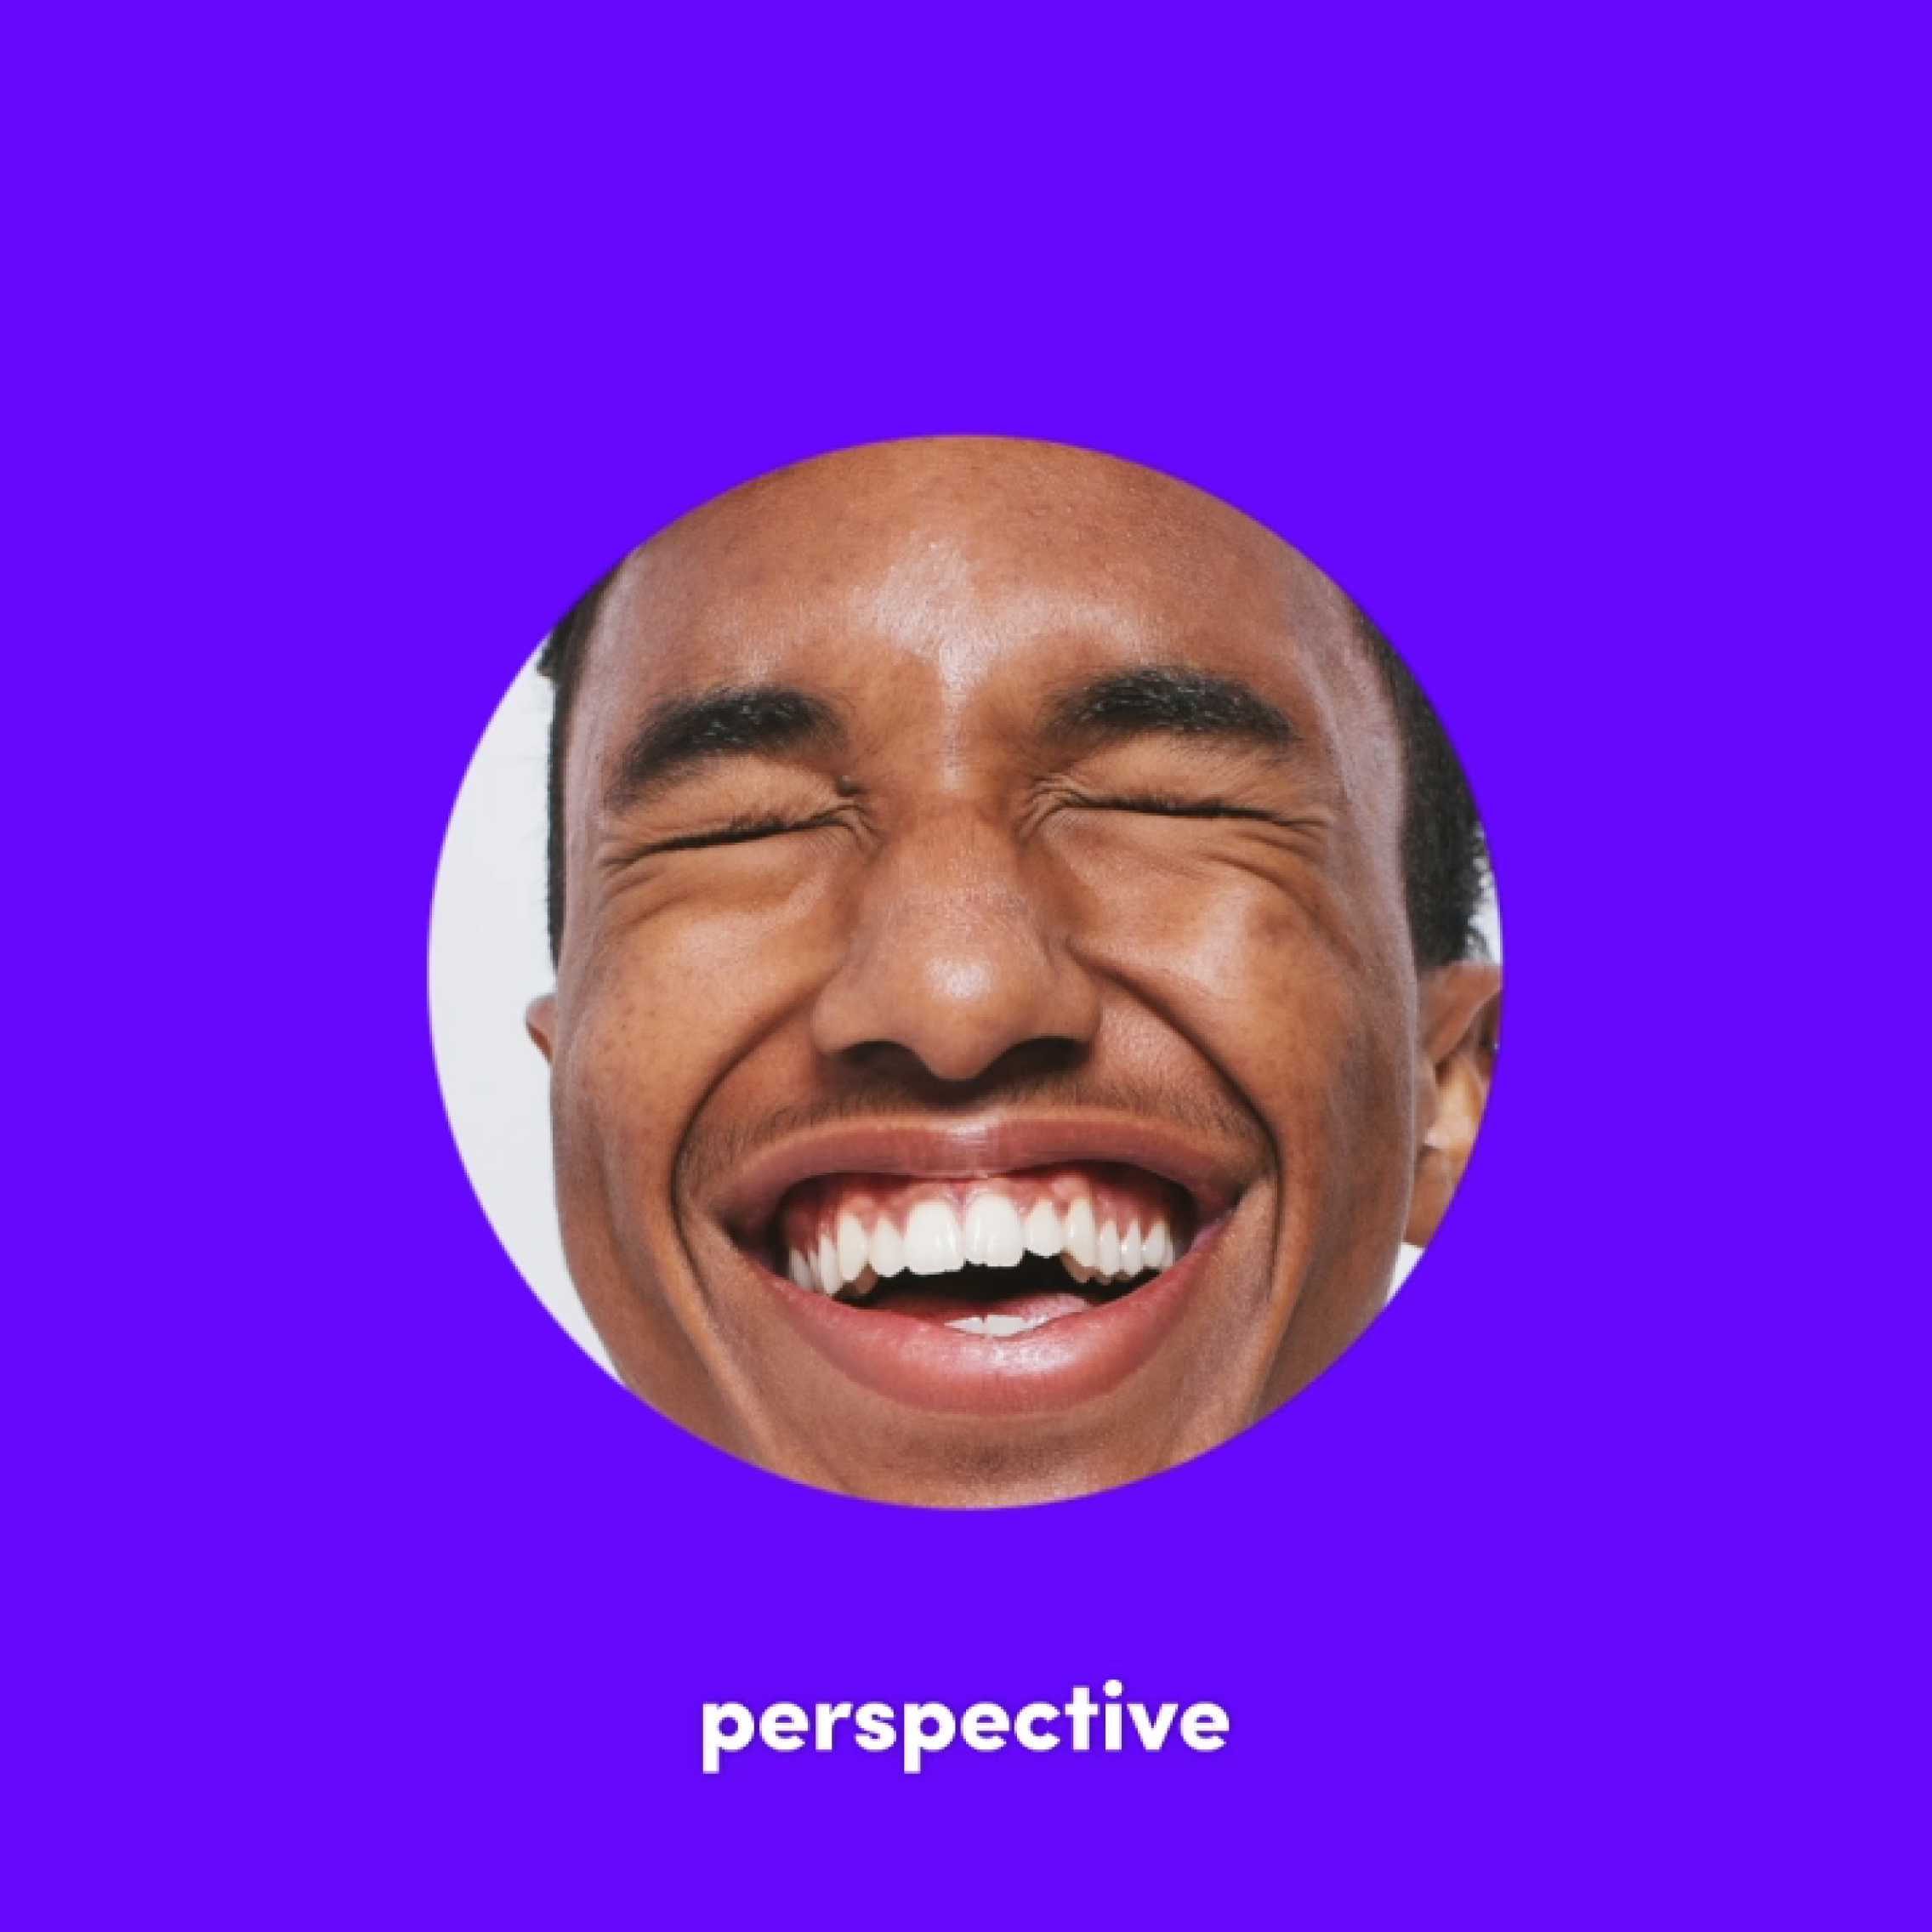 man-smiling-with-purple-circle-frame-in-front perspective